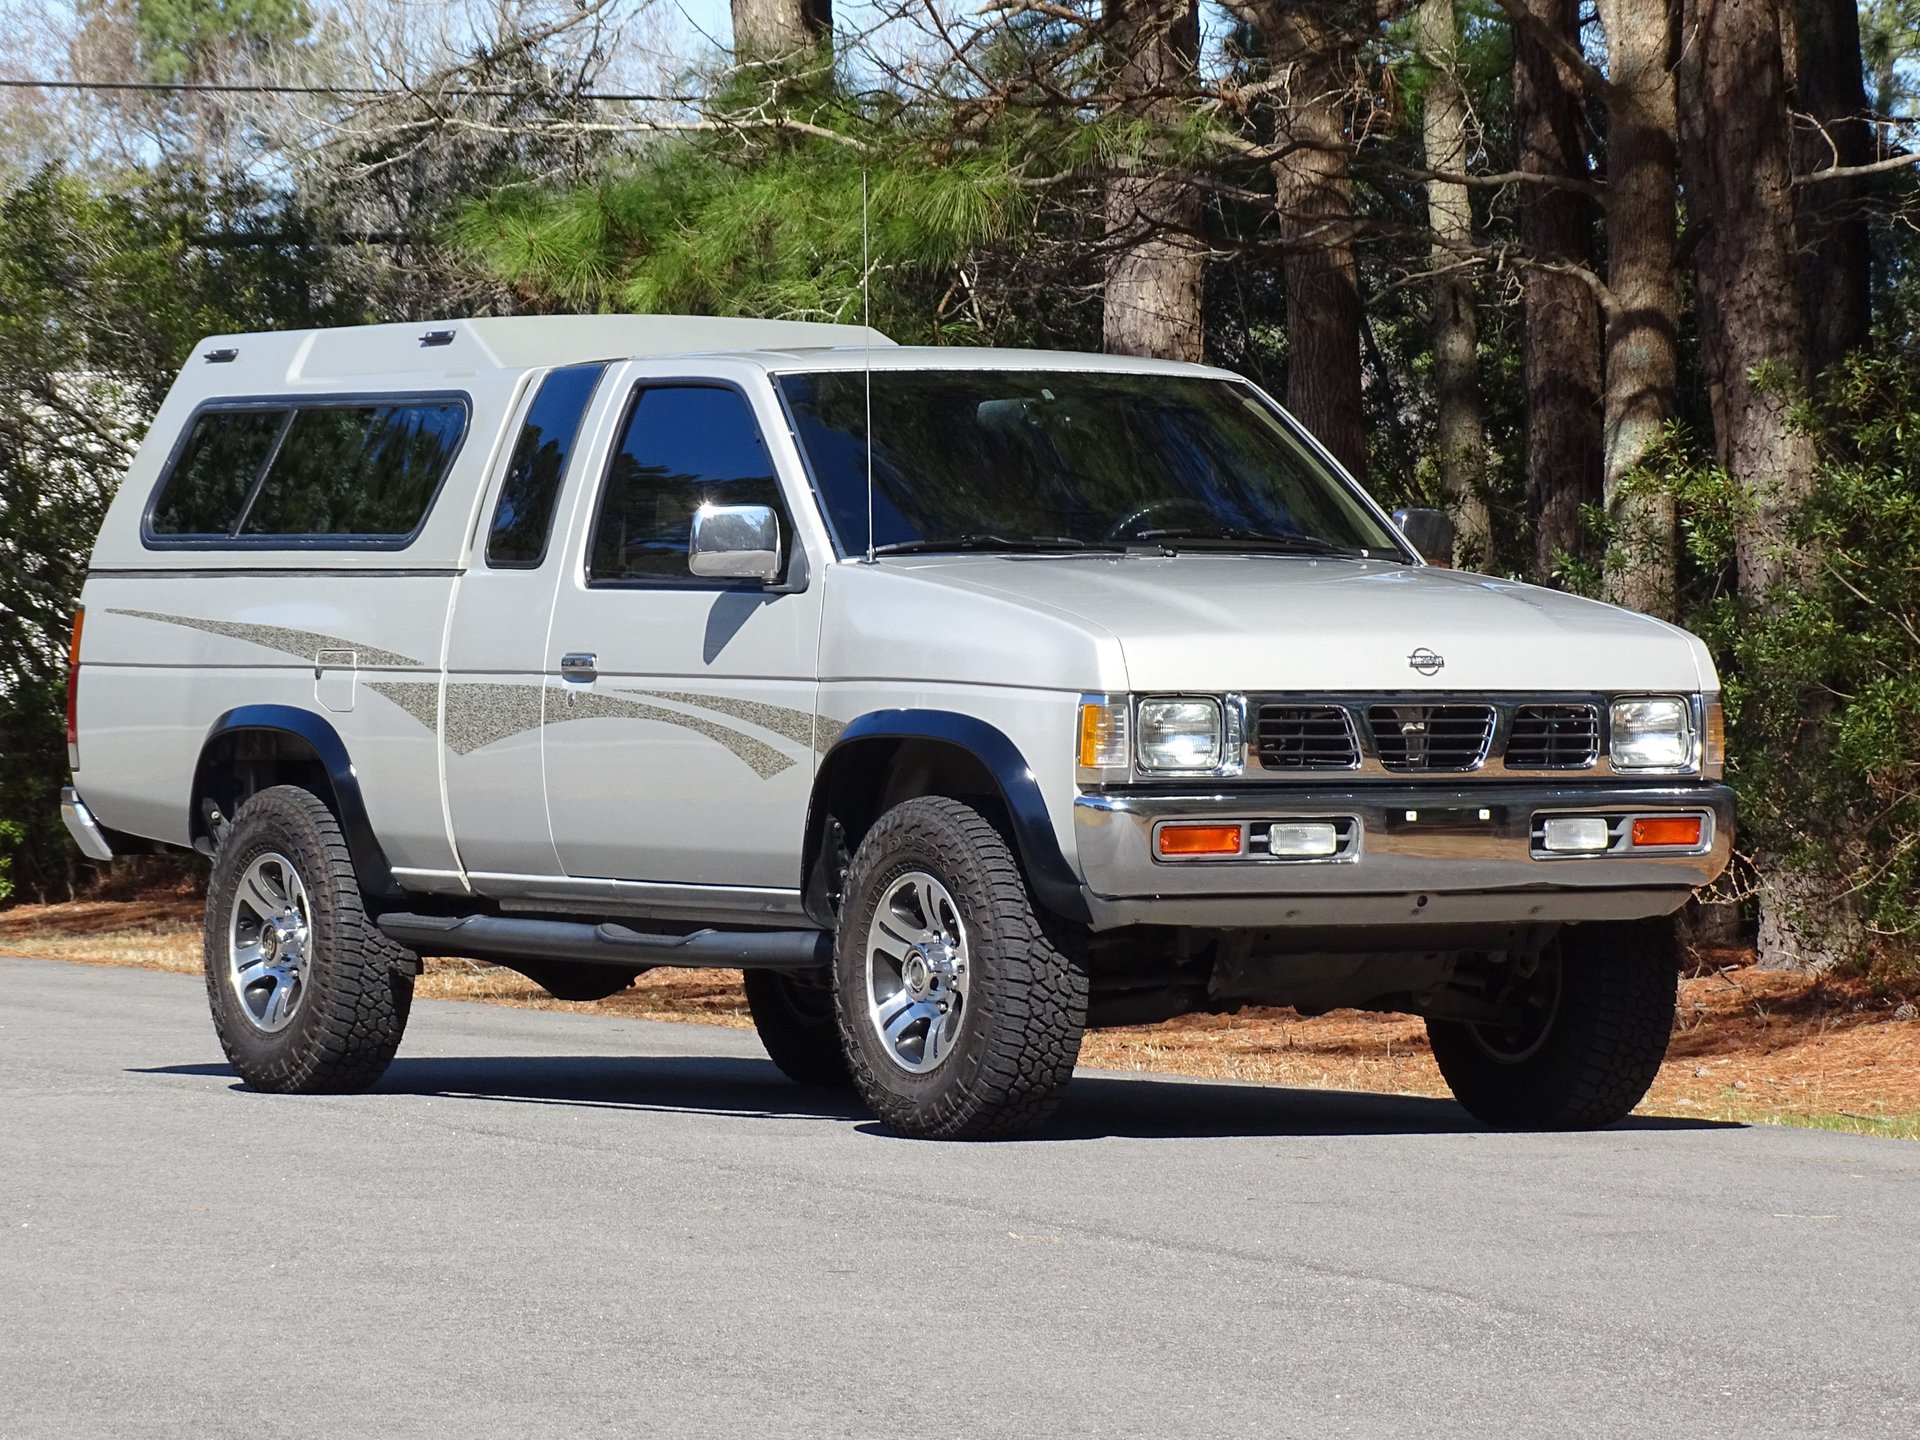 1997 Nissan XE King Cab PIckup | Raleigh Classic Car Auctions